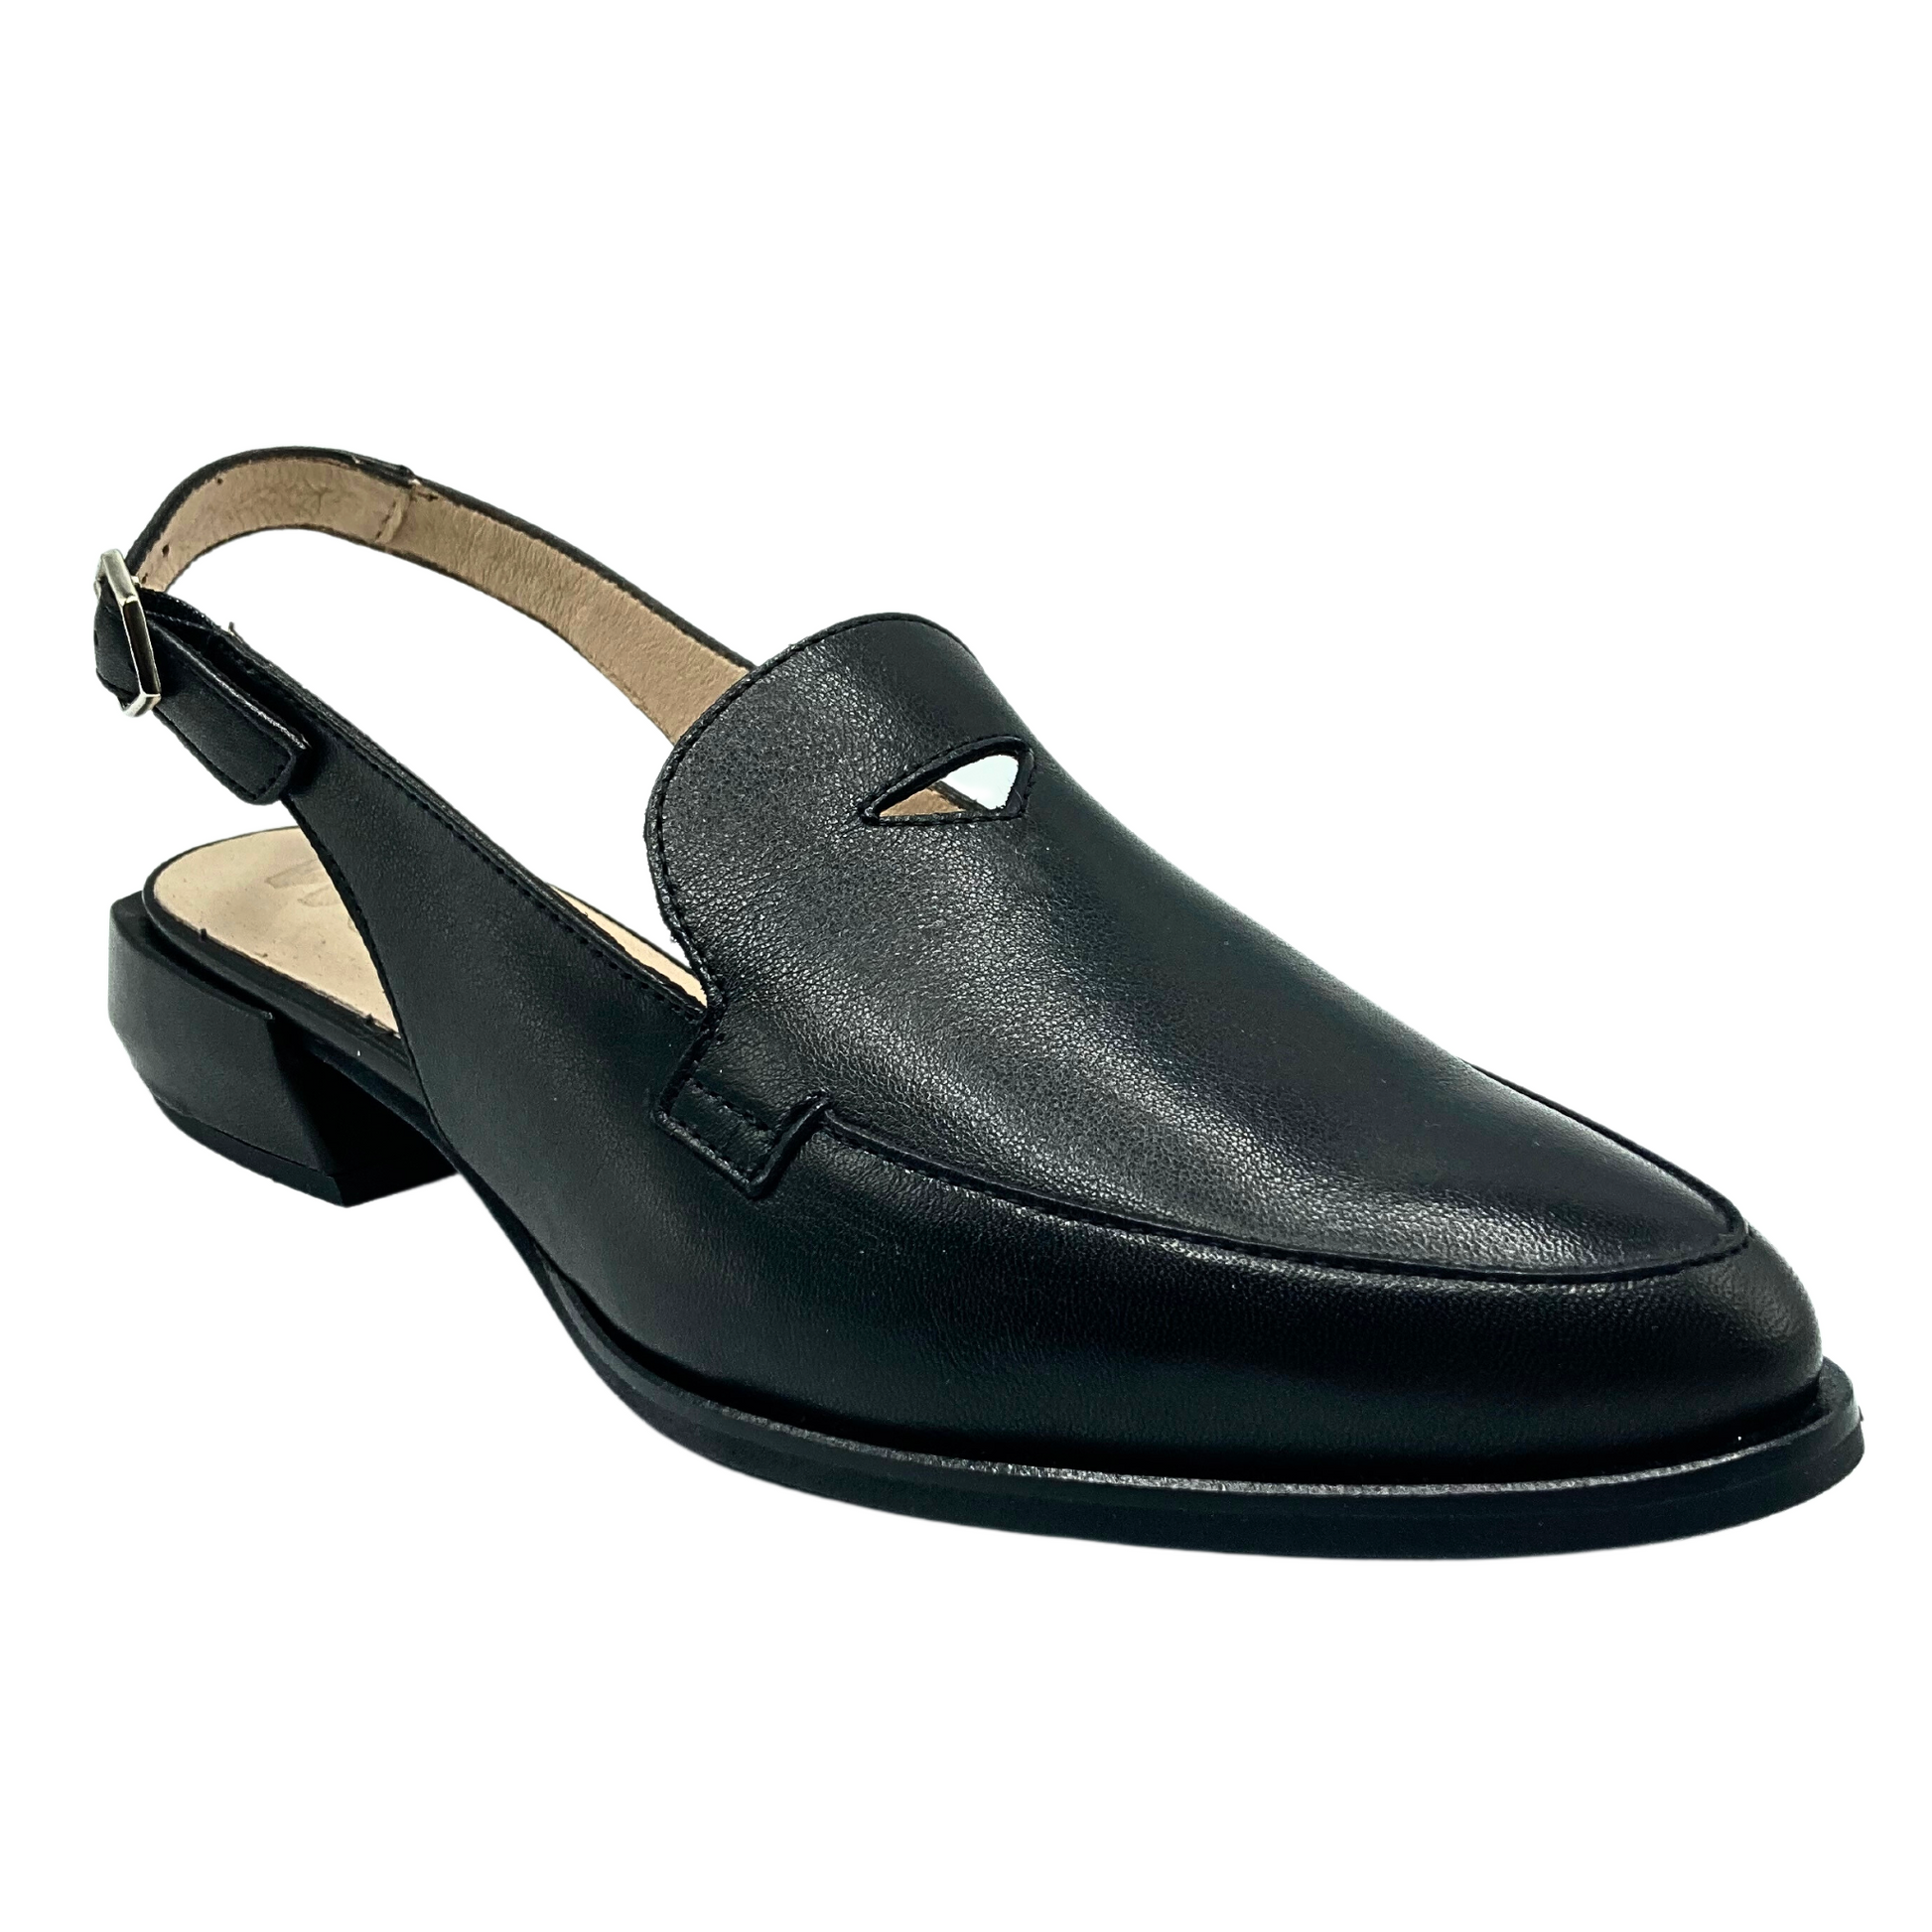 Angled side view of a slingback loafer in black leather.